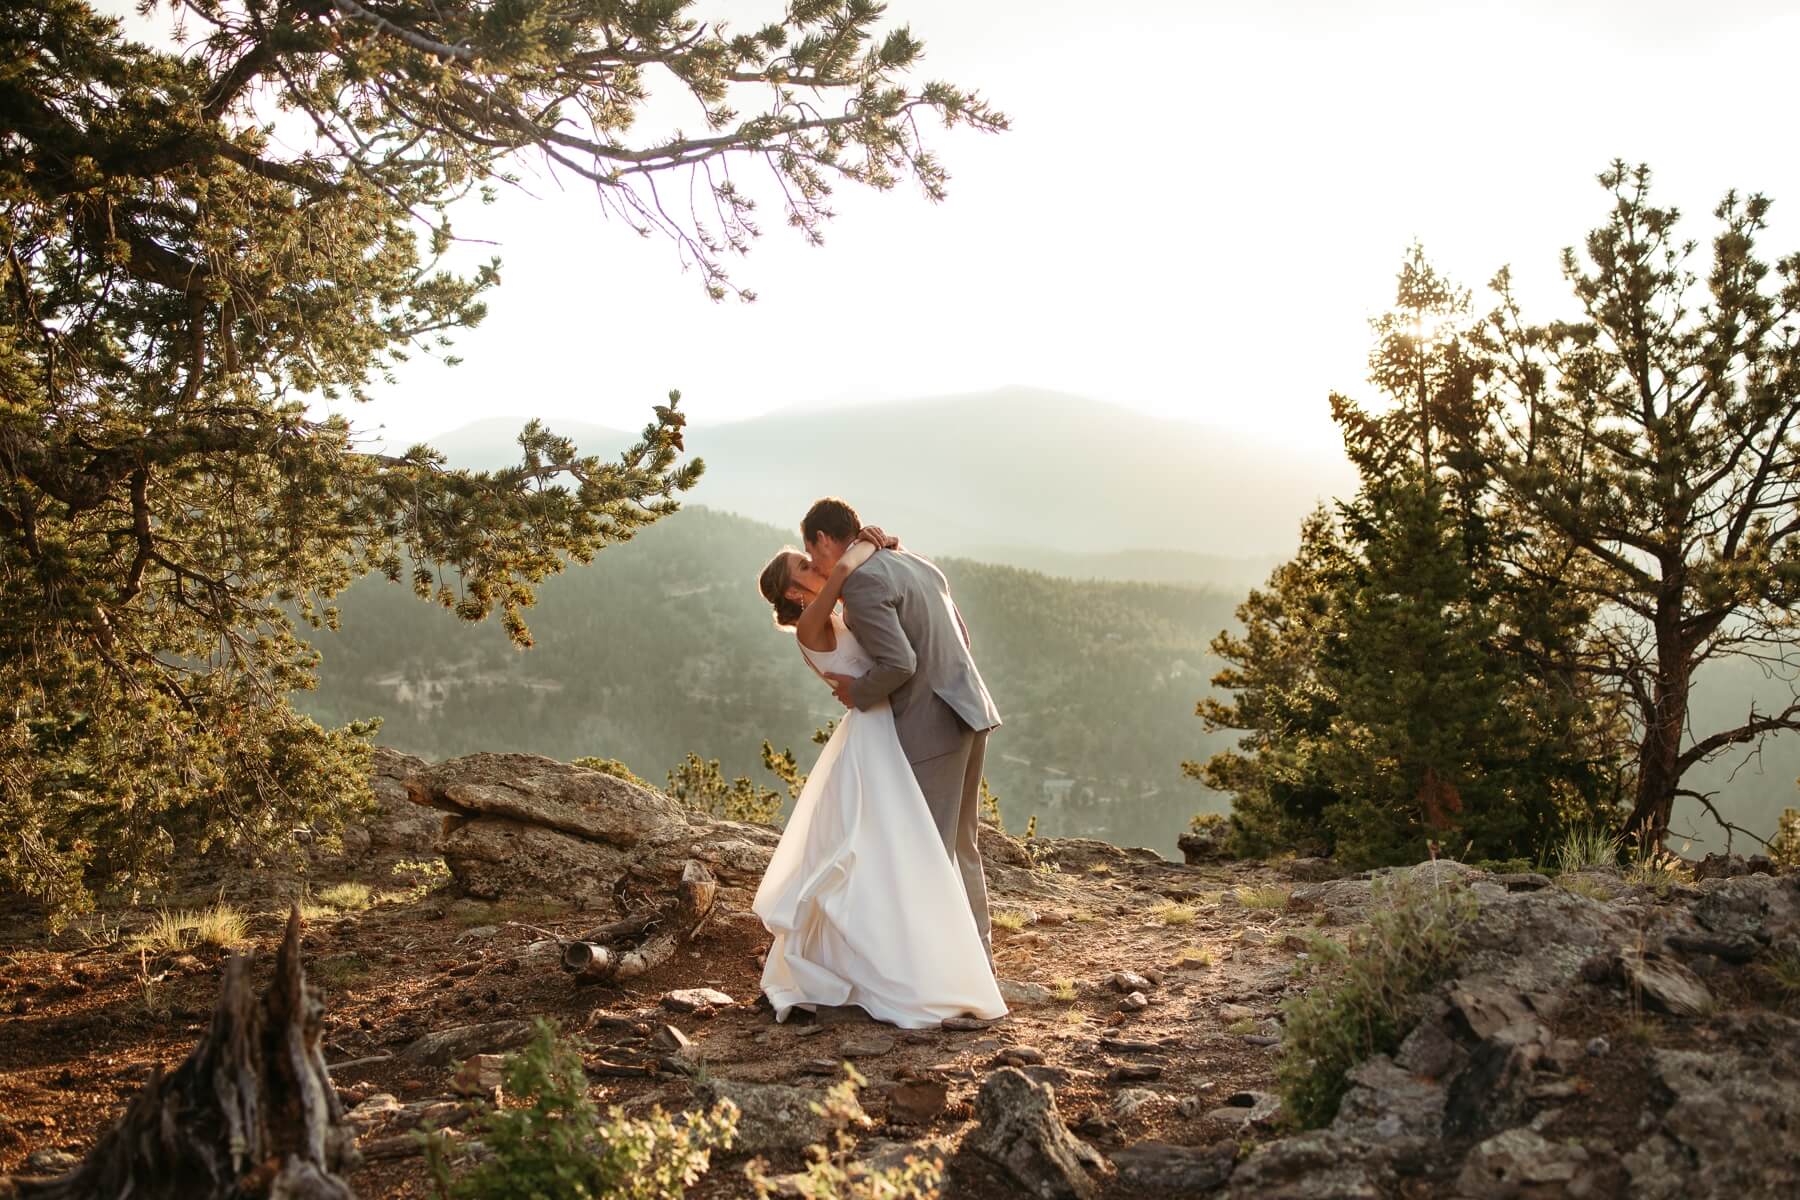 Bride and groom having private first dance at sunset at North Star Gatherings, a Colorado mountain wedding venue